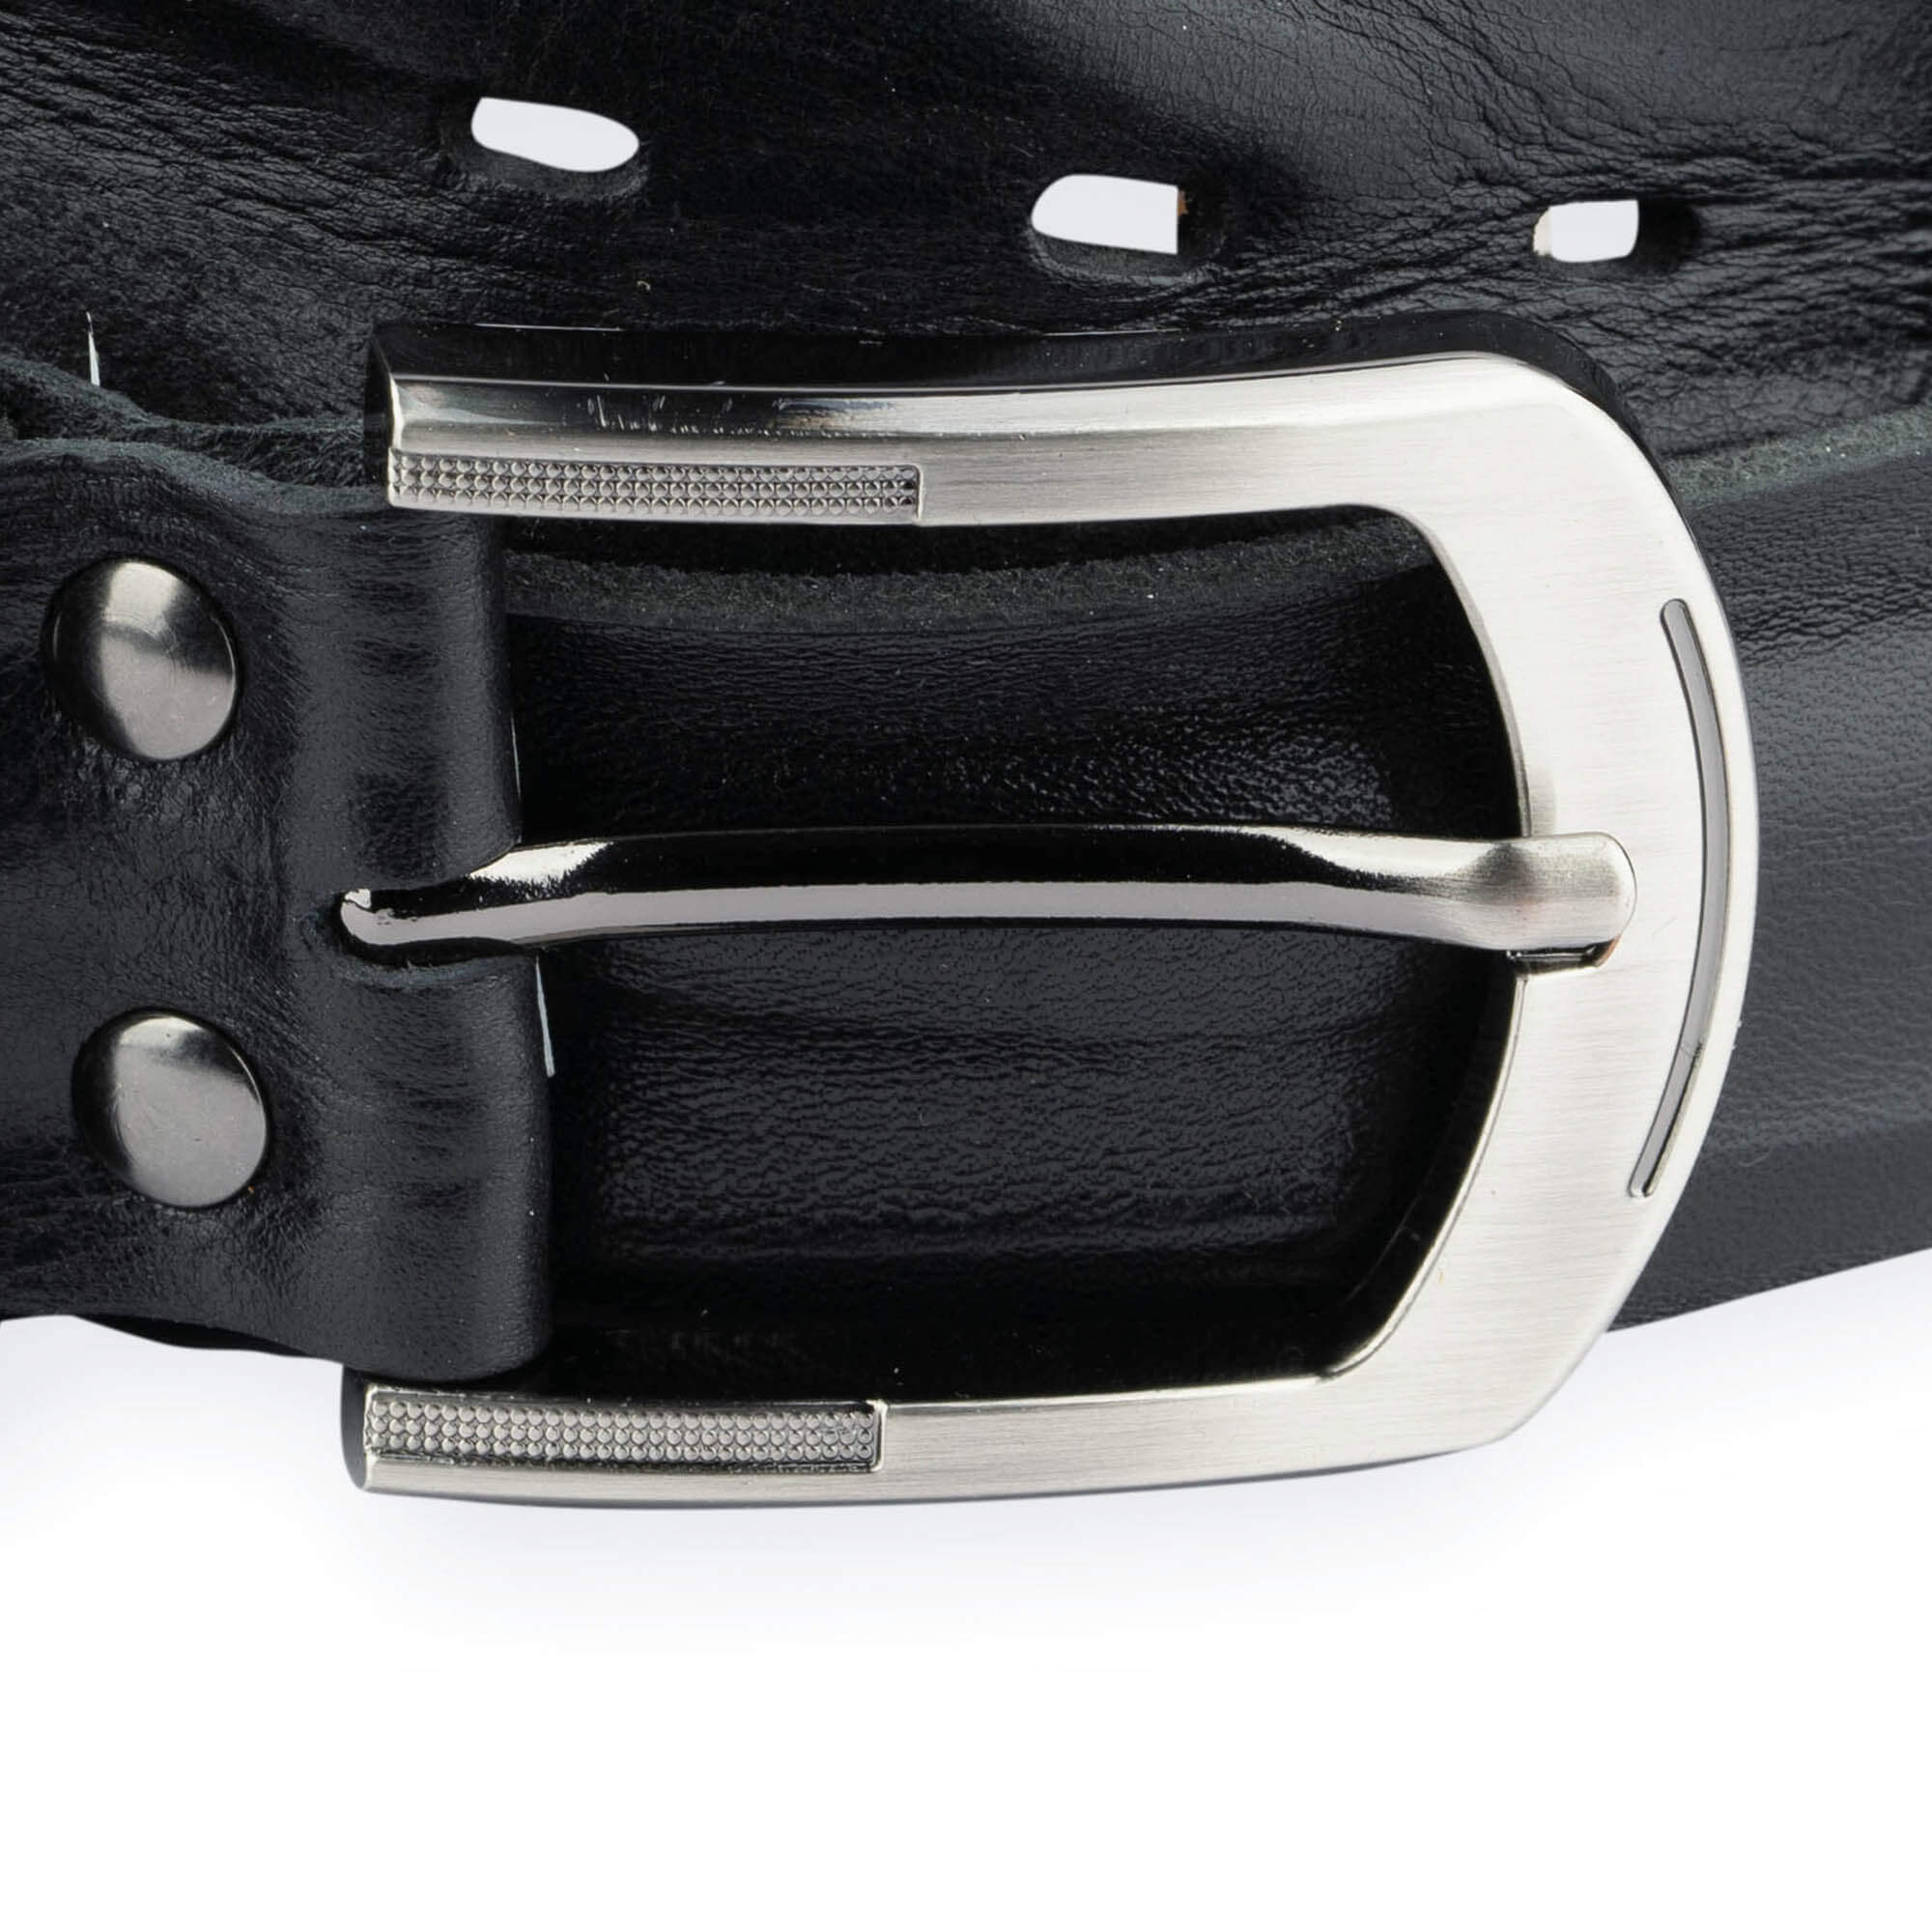 Full Grain Leather Purse Strap, High Quality Wide Leather